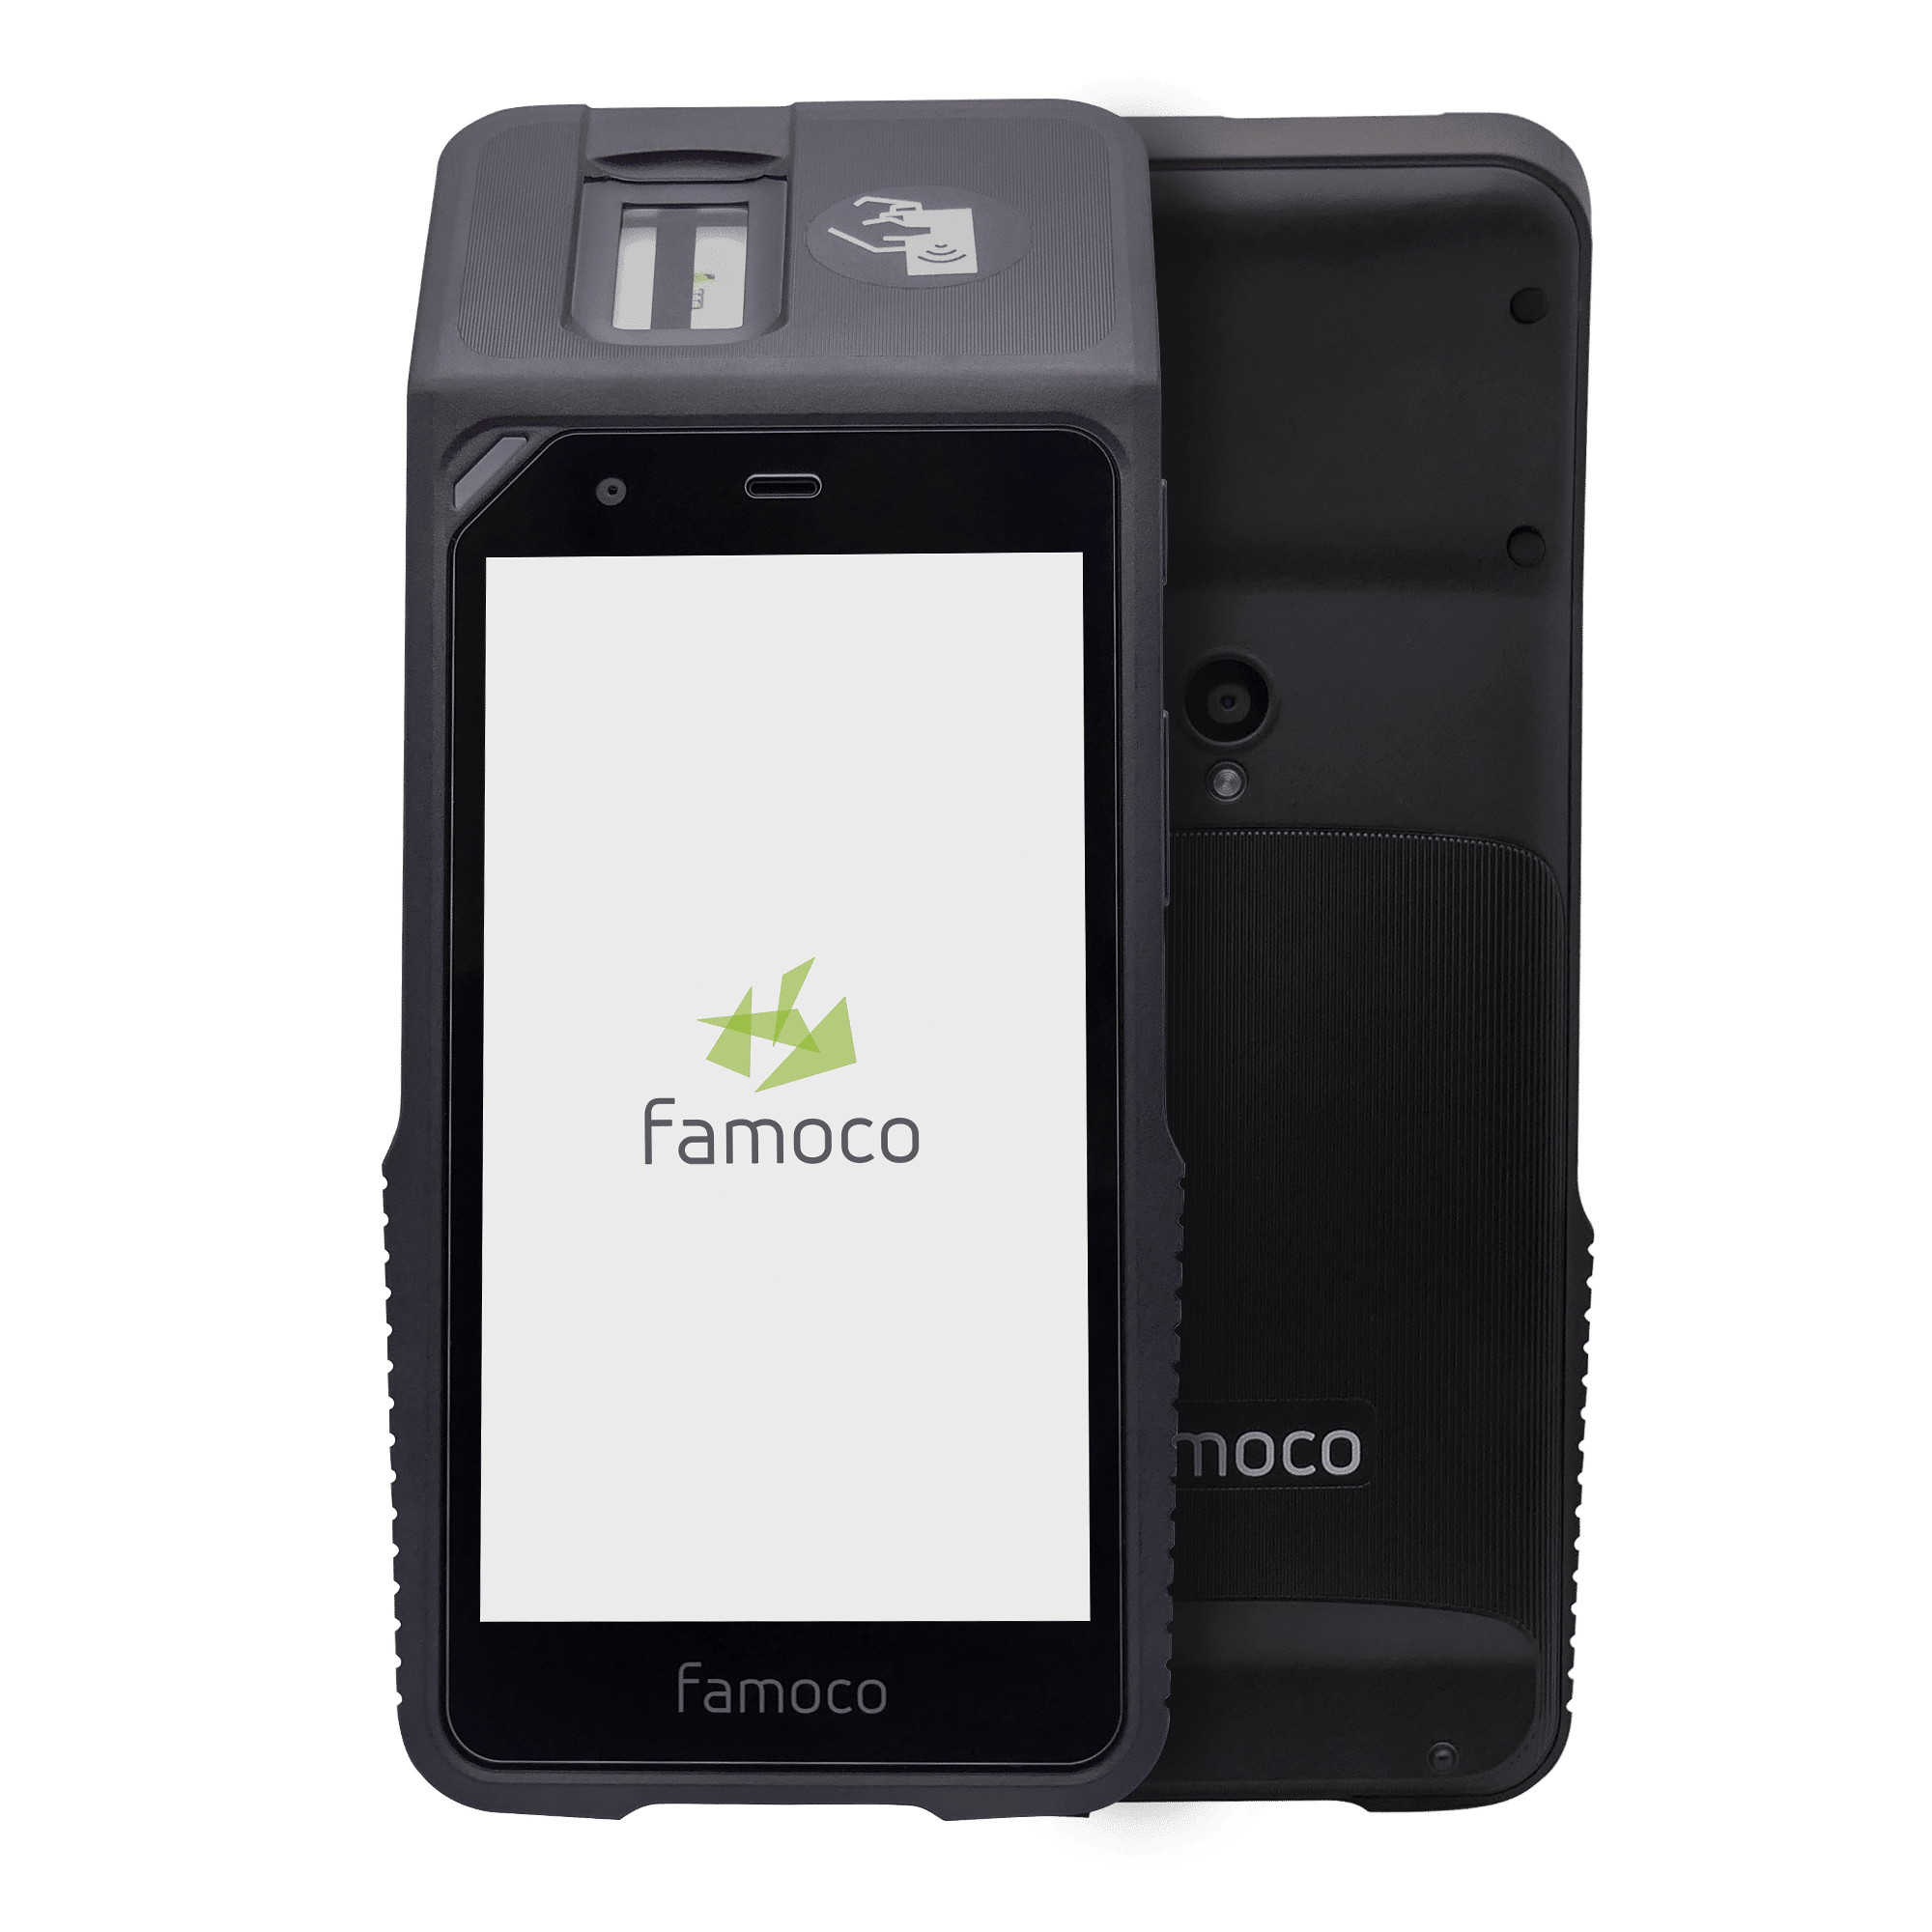 AOSP: Reason why it is the best OS for enterprise mobility - Famoco